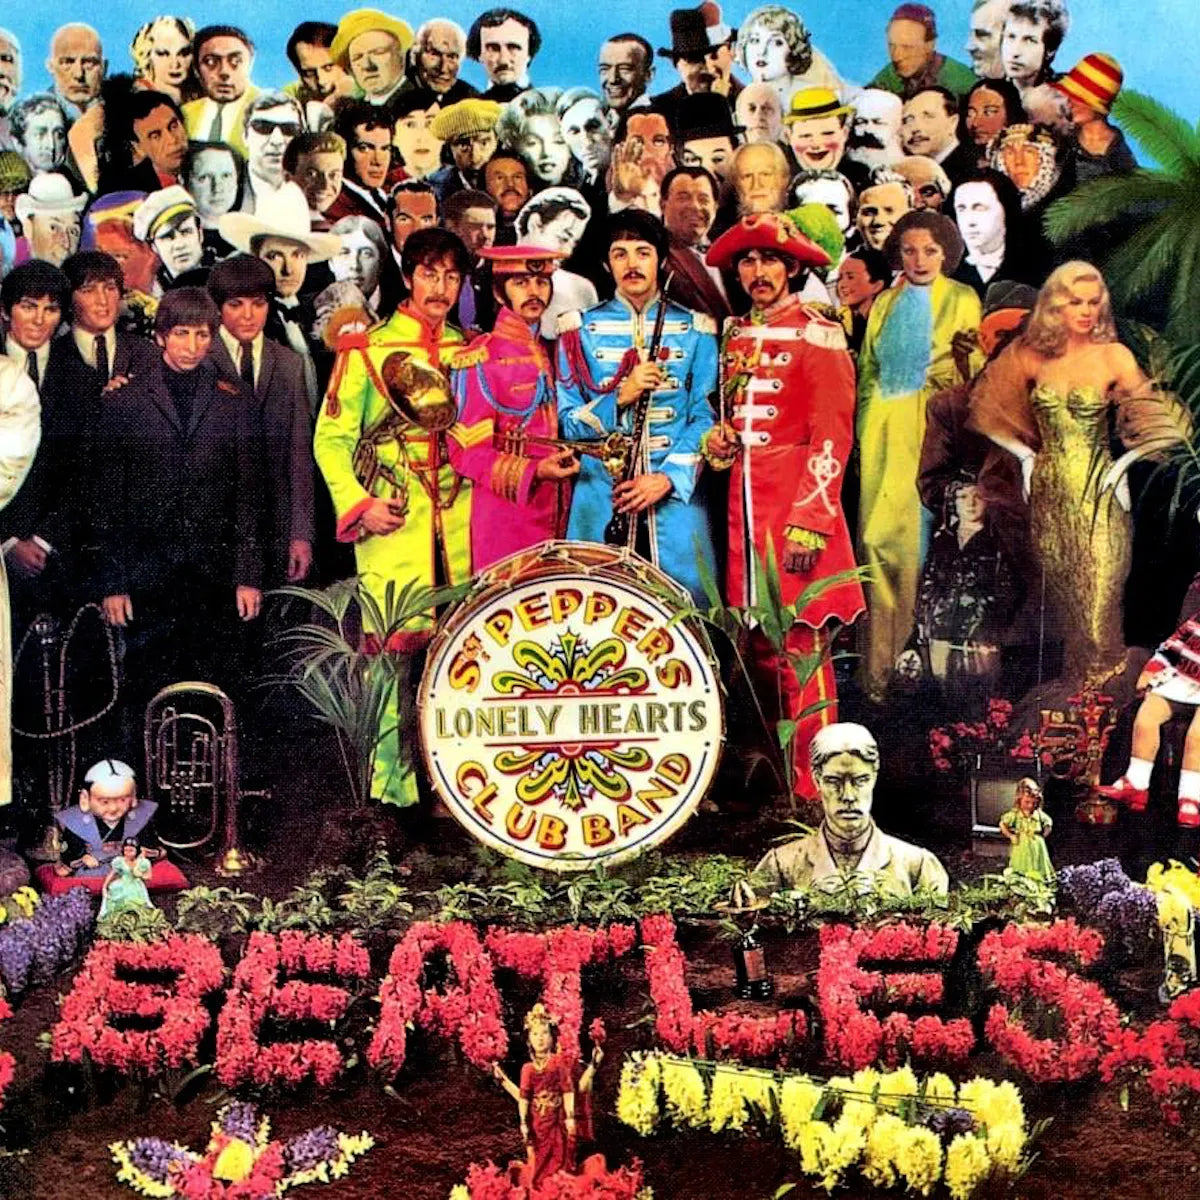 THE BEATLES - SGT. PEPPER’S LONELY HEARTS CLUB BAND - ANNIVERSARY EDITION - VINYL LP - Wah Wah Records